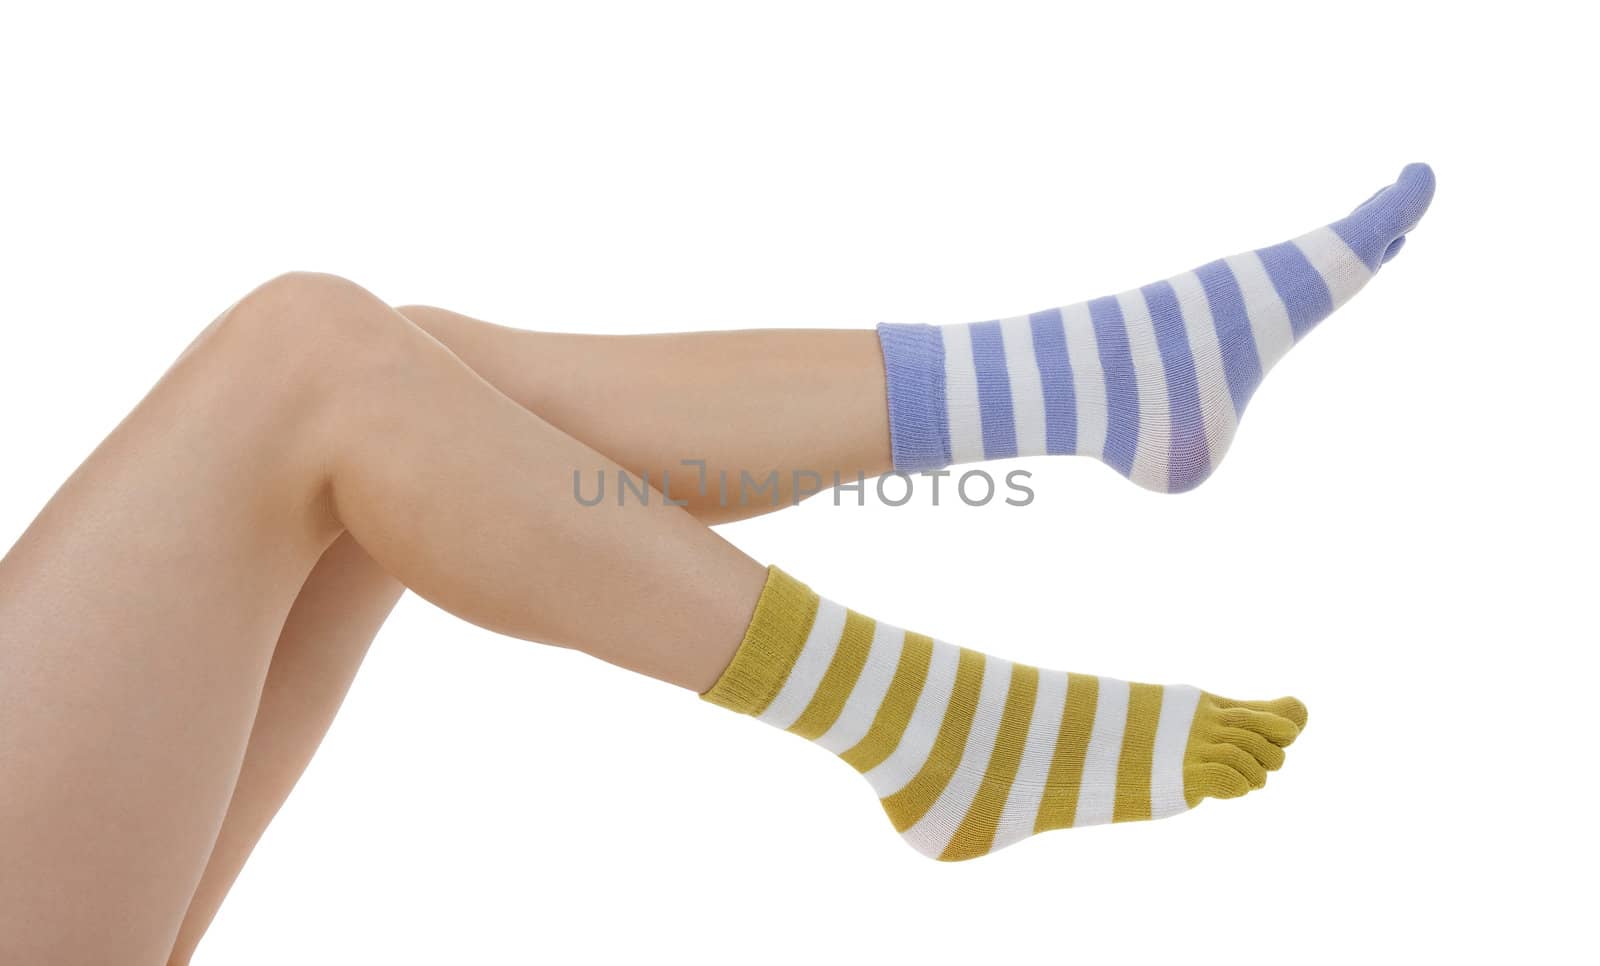 Female legs in socks of different colors by anikasalsera